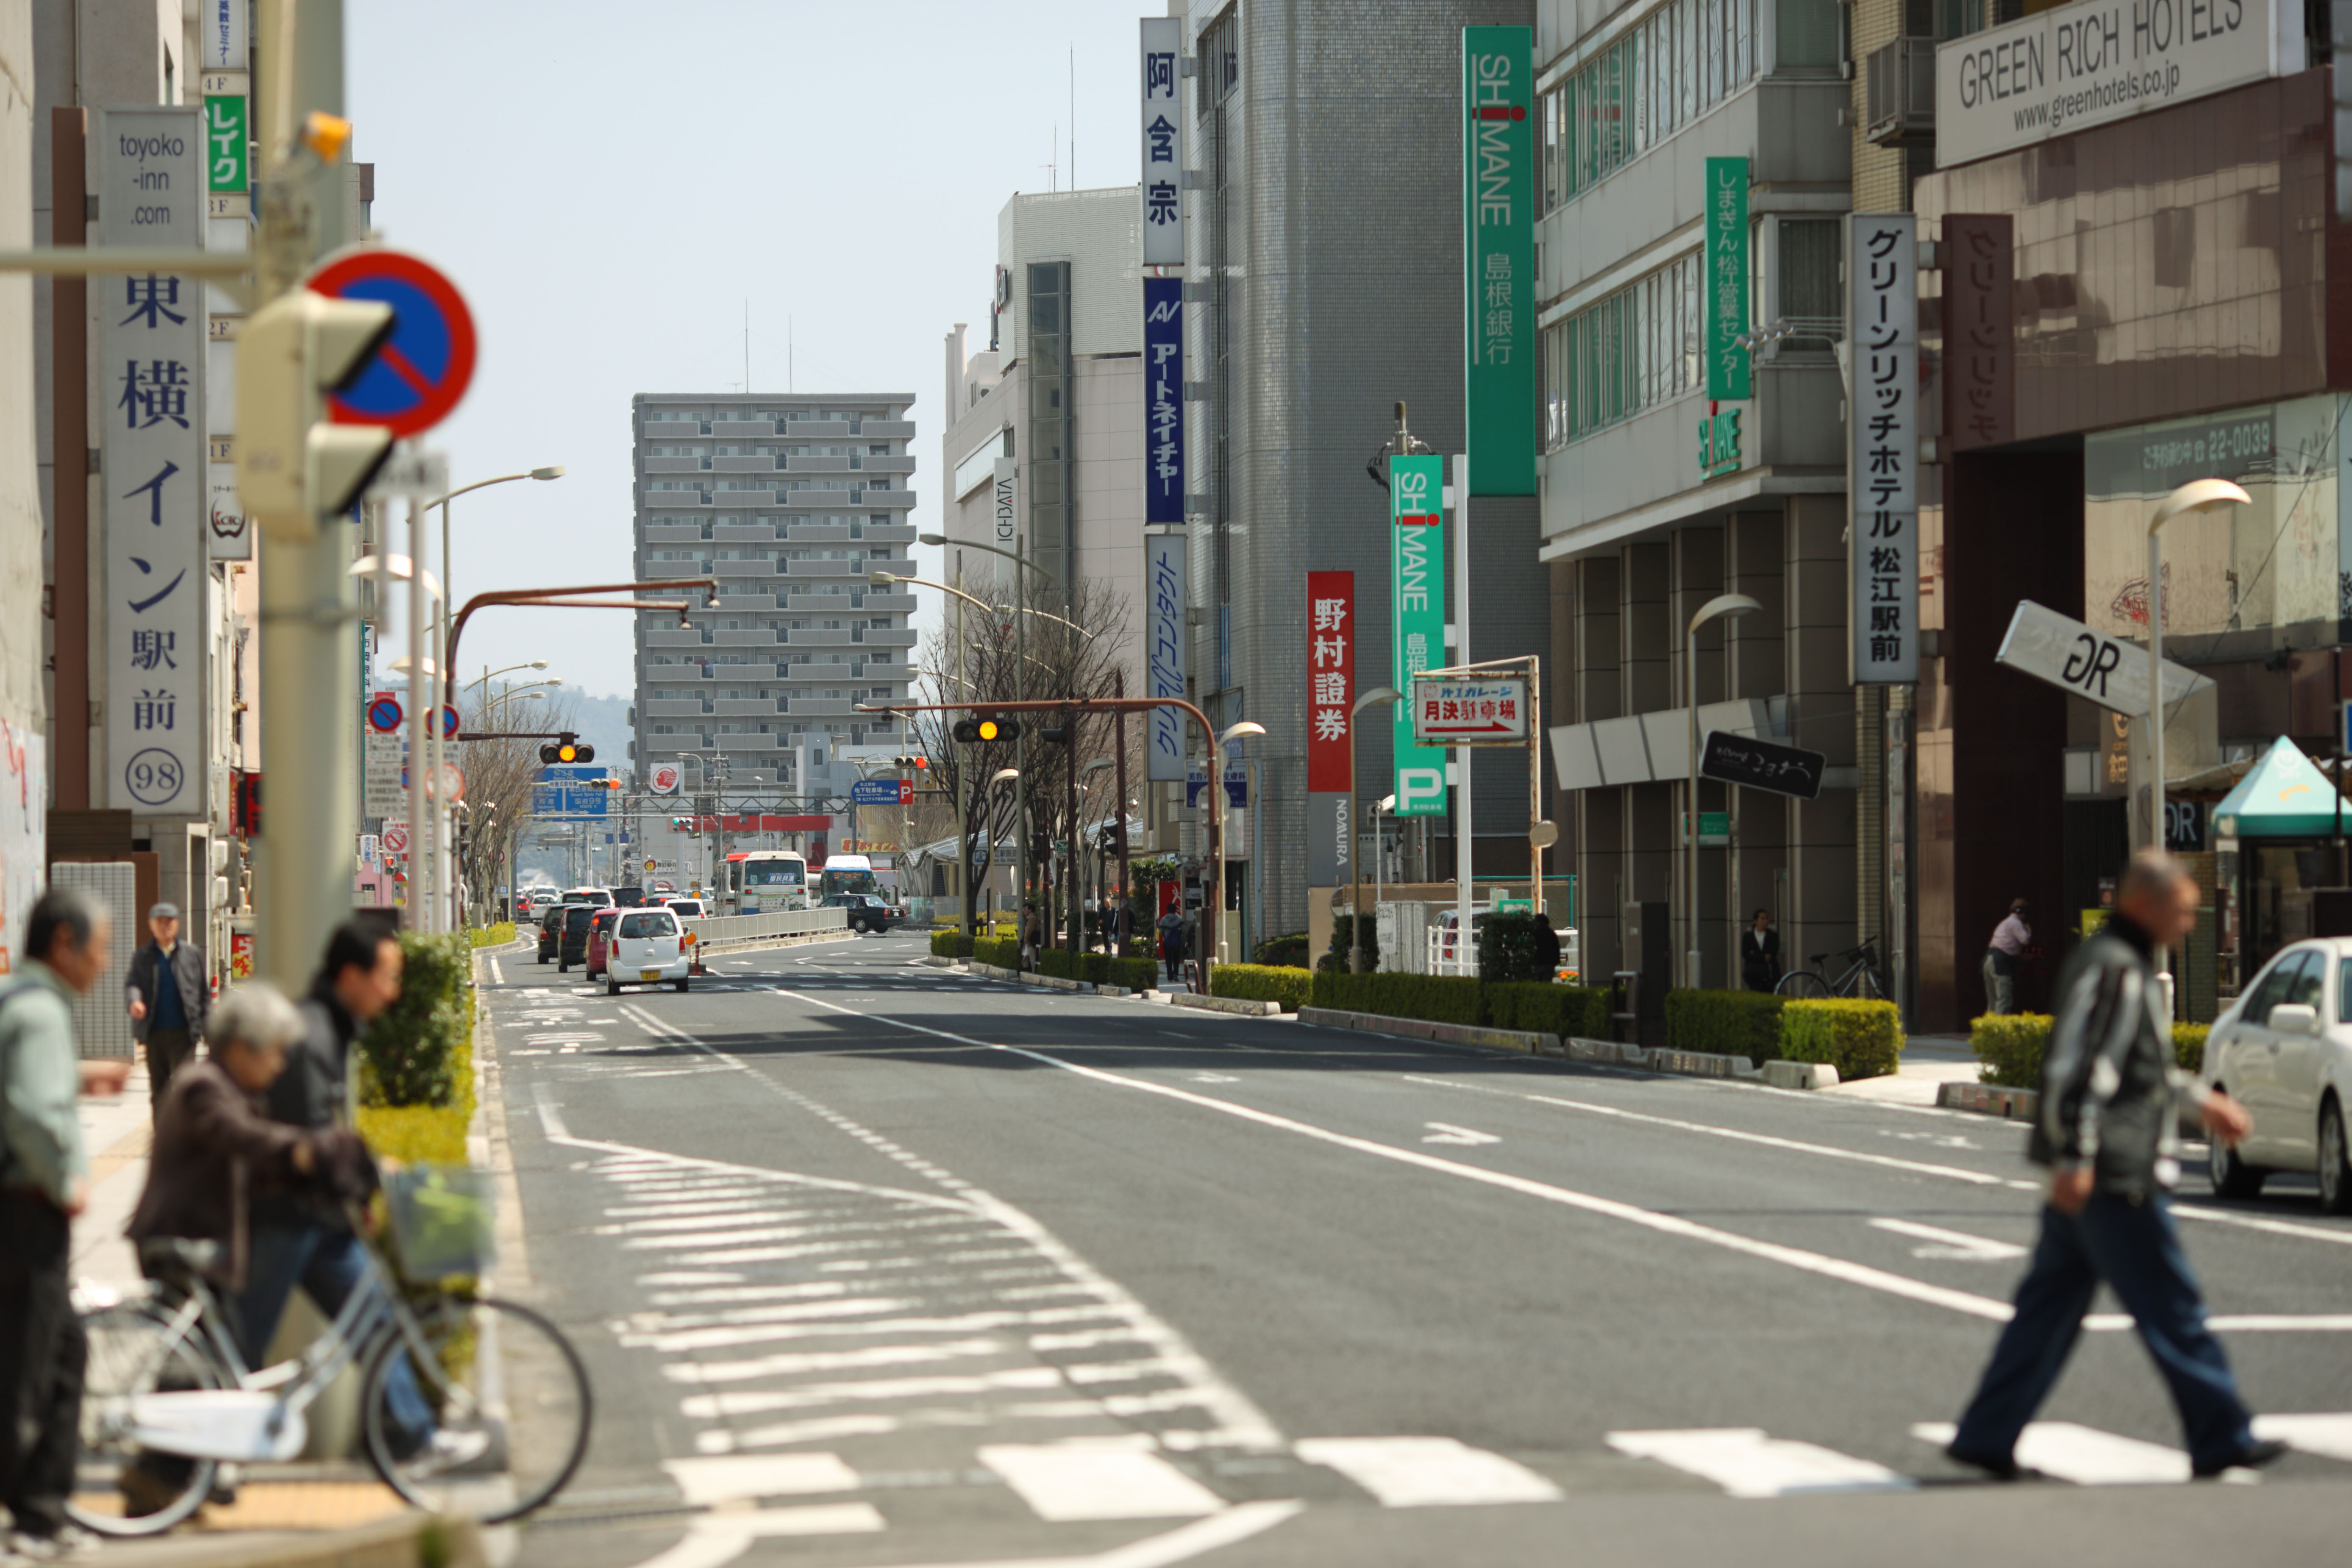 photo,material,free,landscape,picture,stock photo,Creative Commons,The Matsue city, pedestrian crossing, Asphalt, road, white line